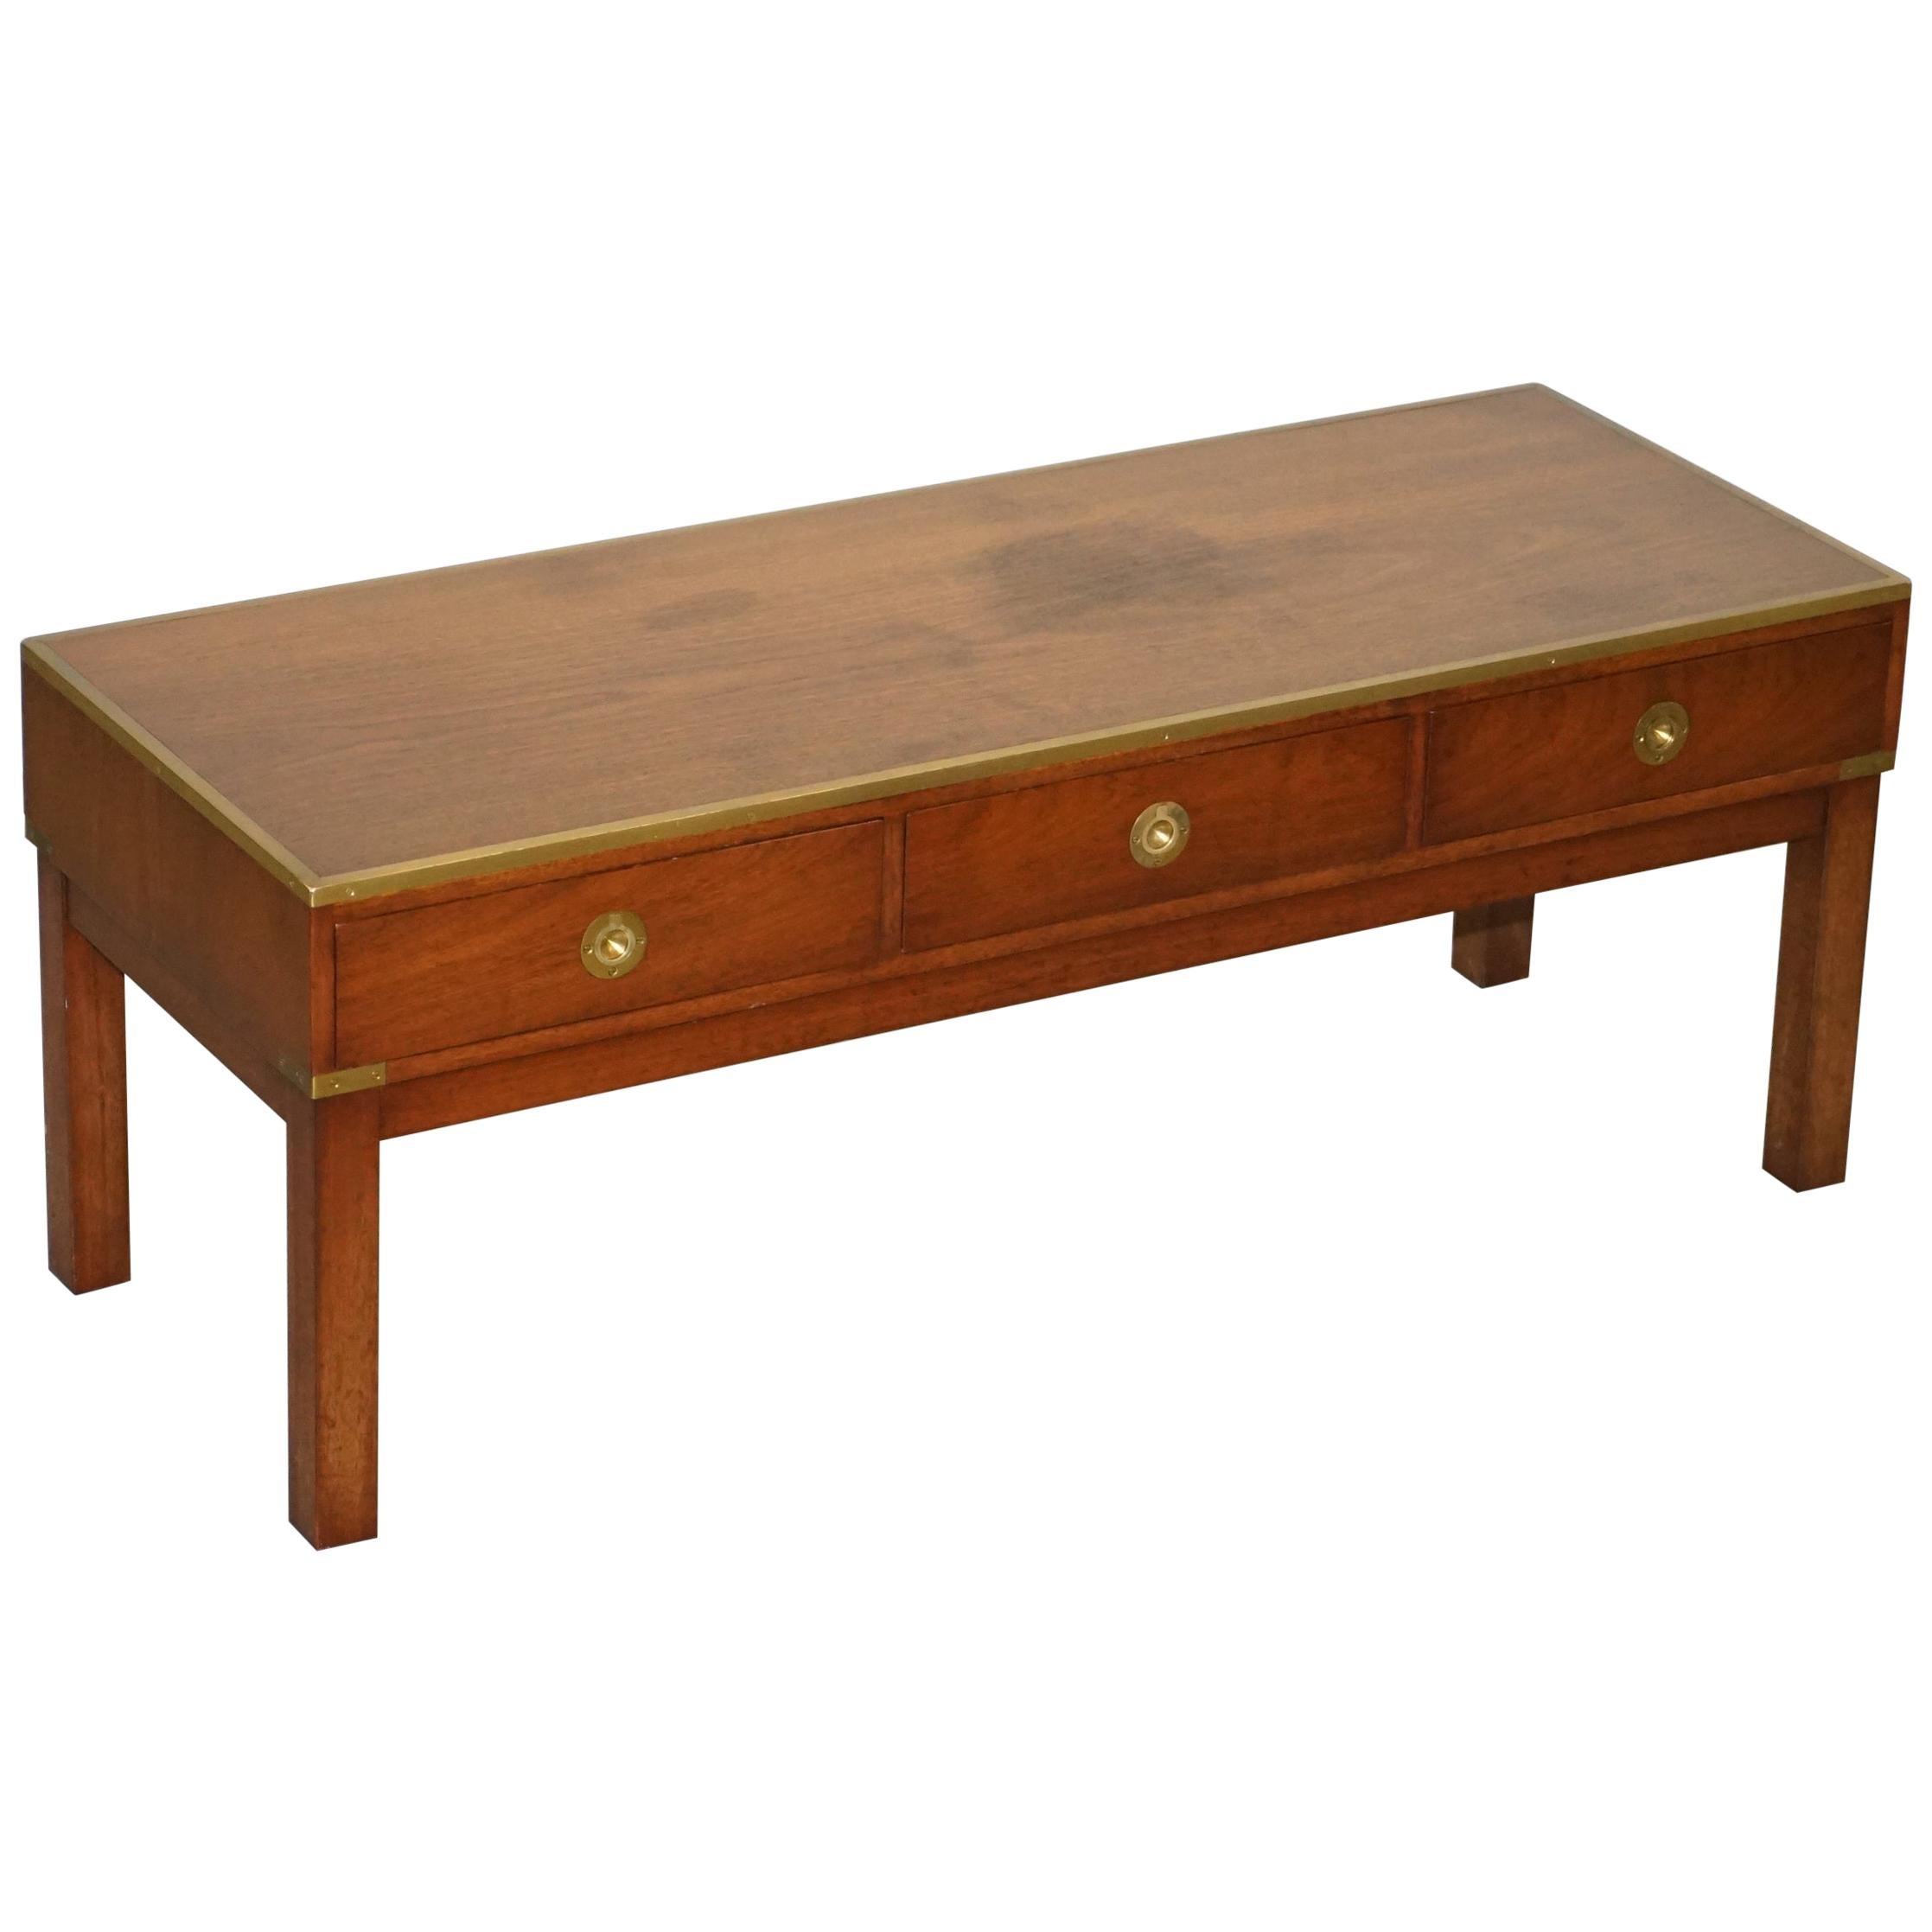 Harrods Kennedy Military Campaign Hardwood Coffee Table Part of Large Suite